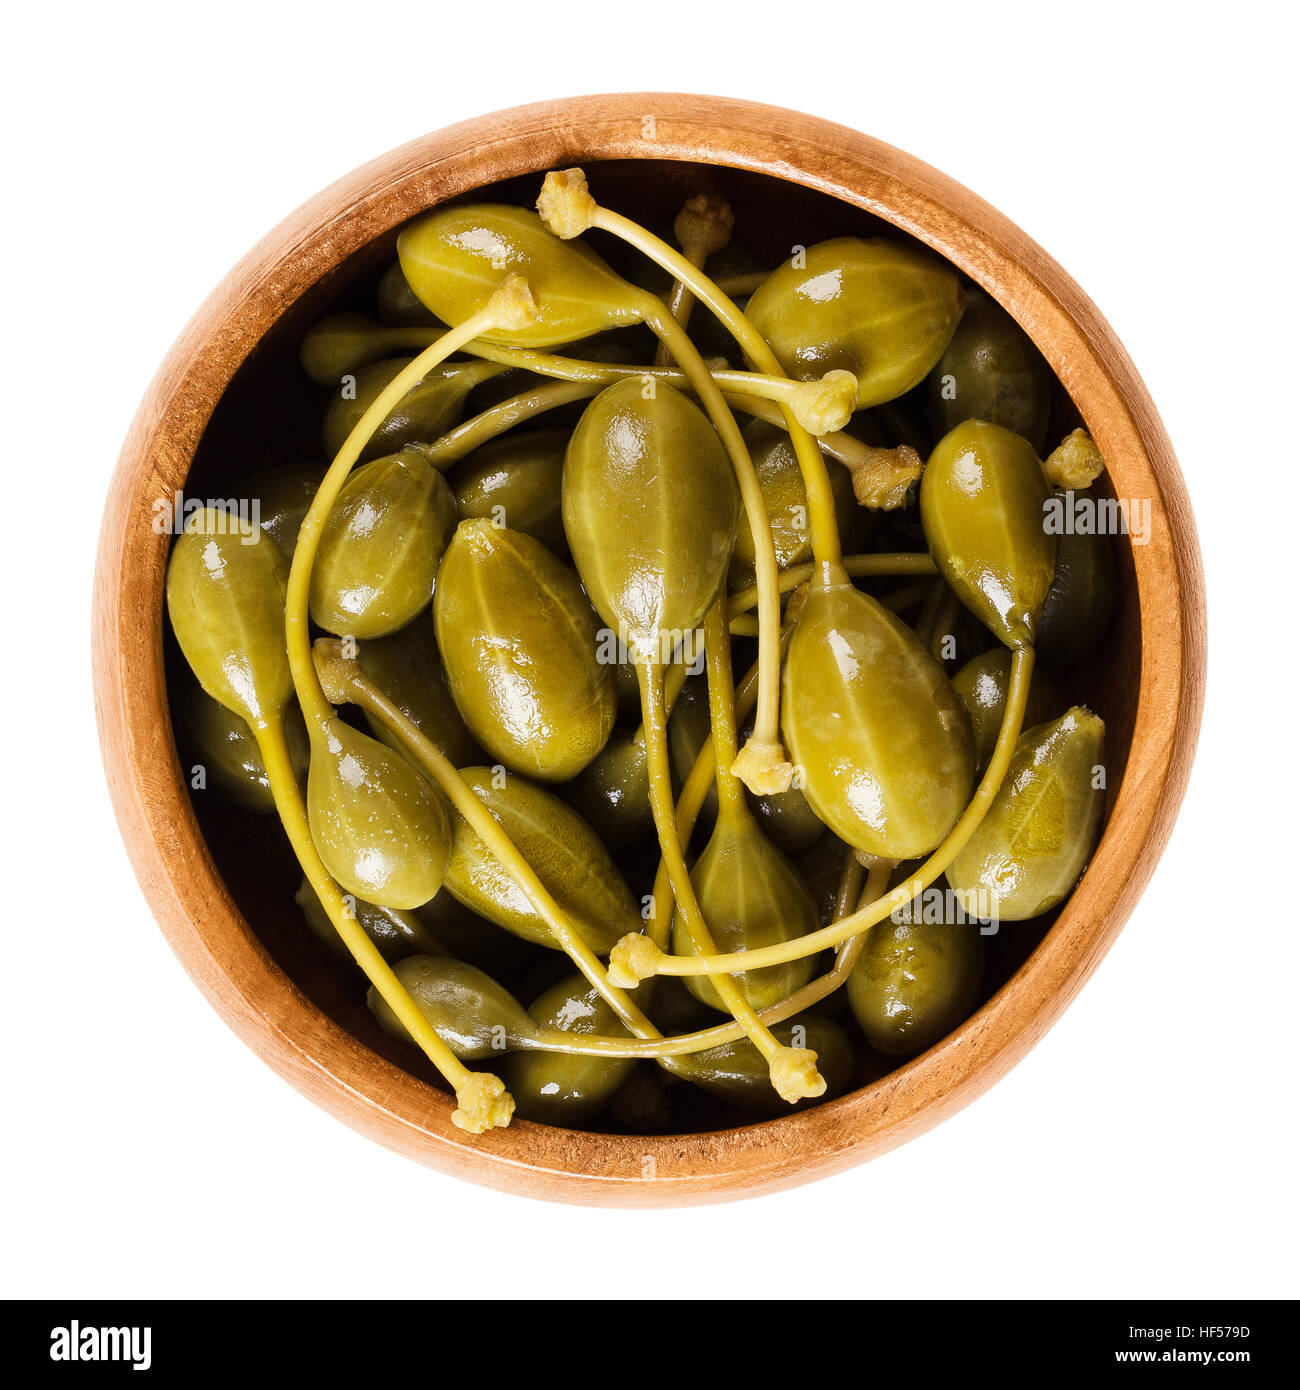 Pickled caper berries in wooden bowl. Edible fruits of Capparis spinosa, caper bush or Flinders rose. Stock Photo